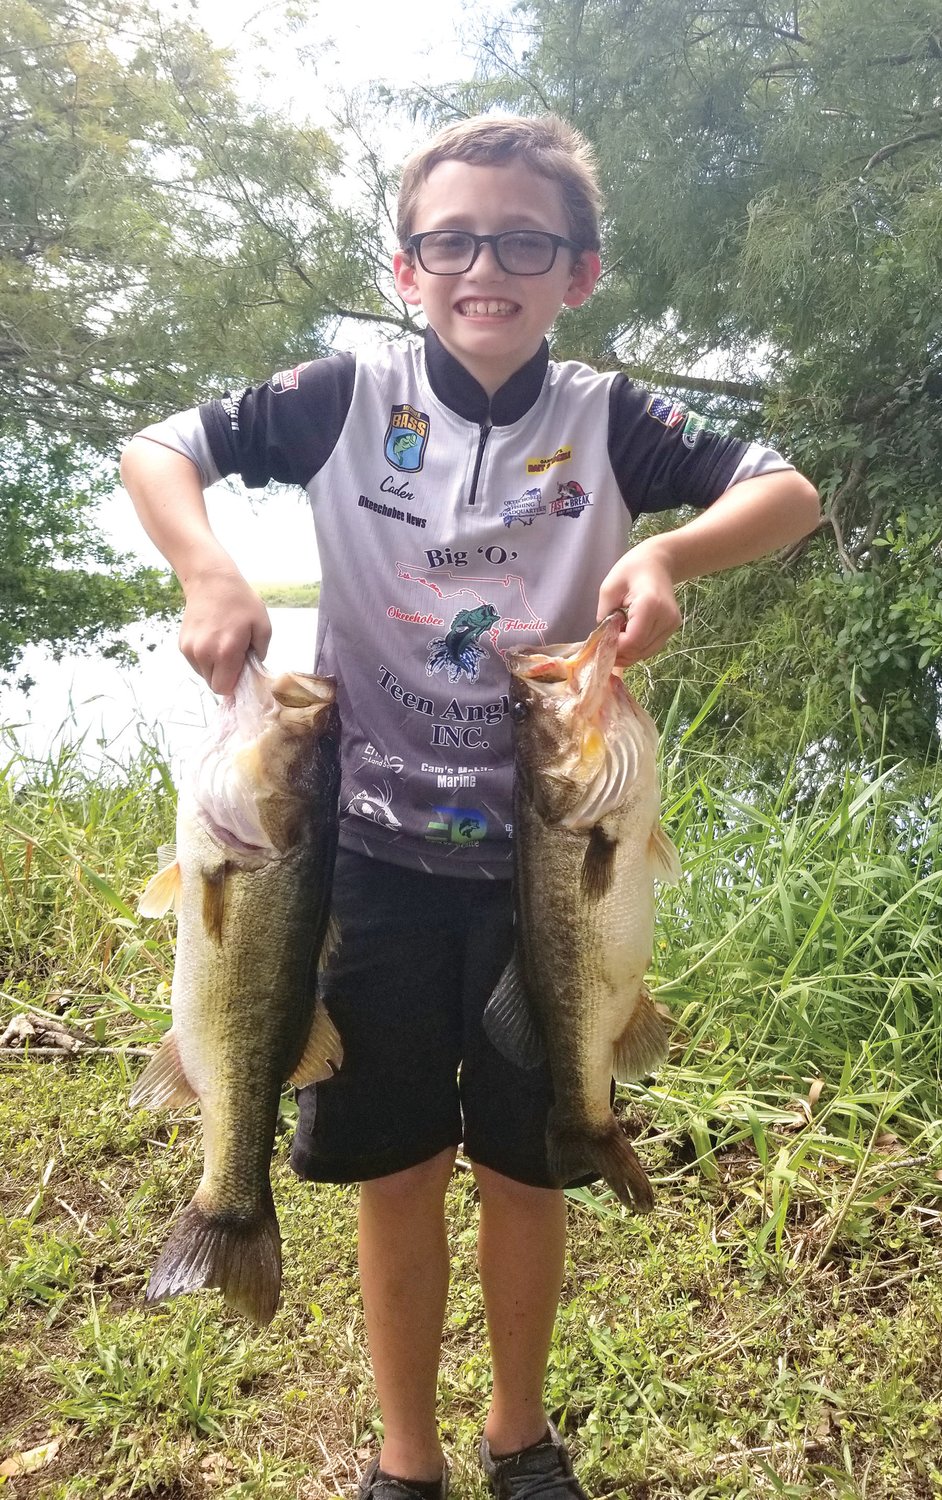 Caden Ellerbee placed first with 9.69 pounds and Big Fish weighing 4.39 pounds.